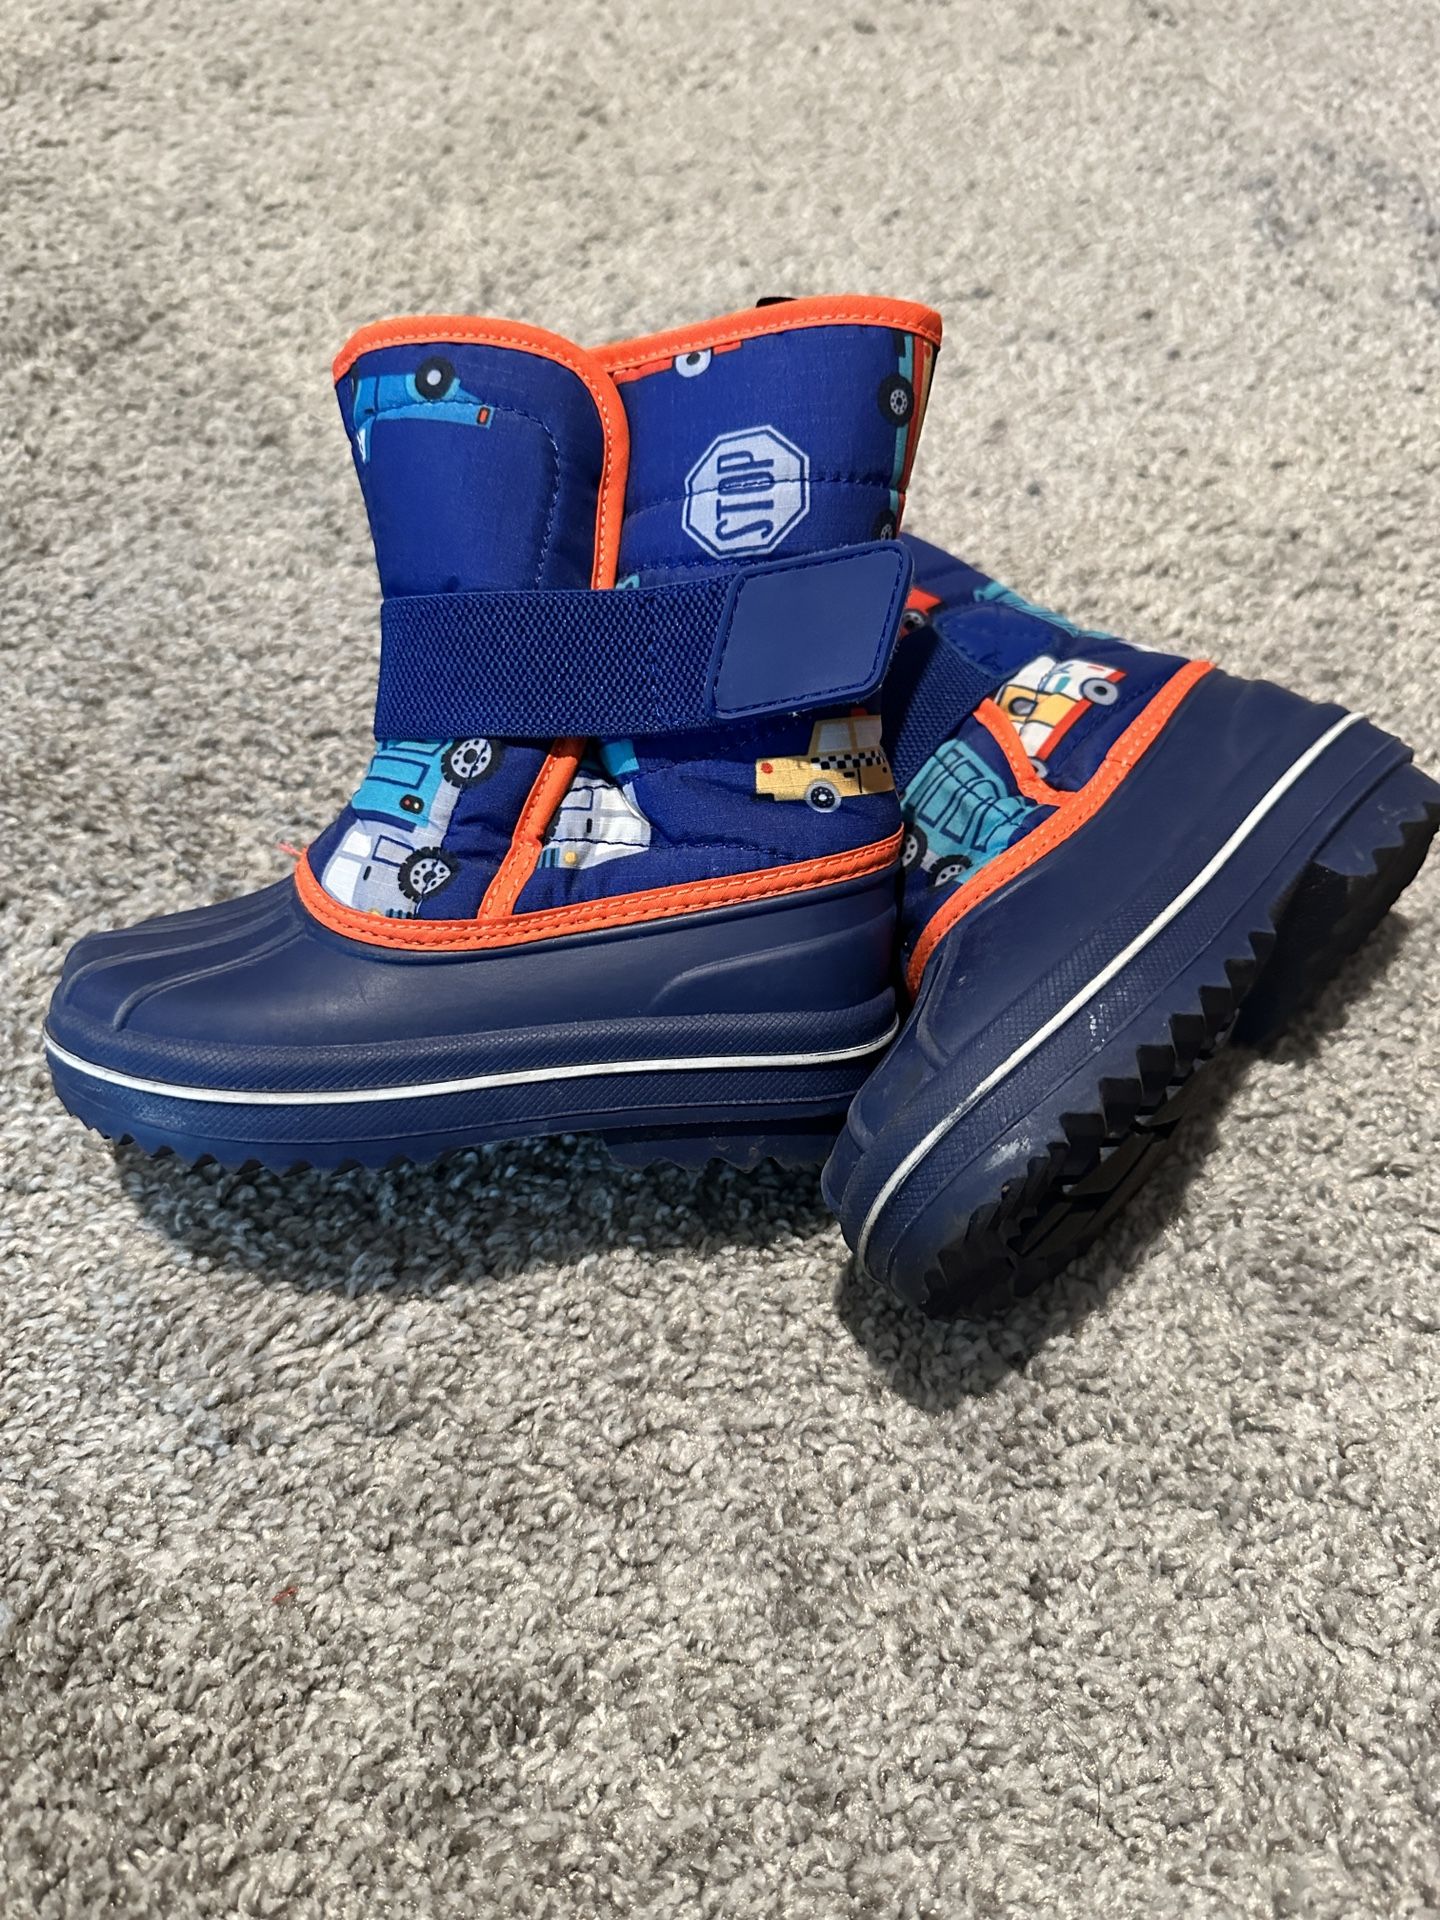 Snow Boots For Boys 